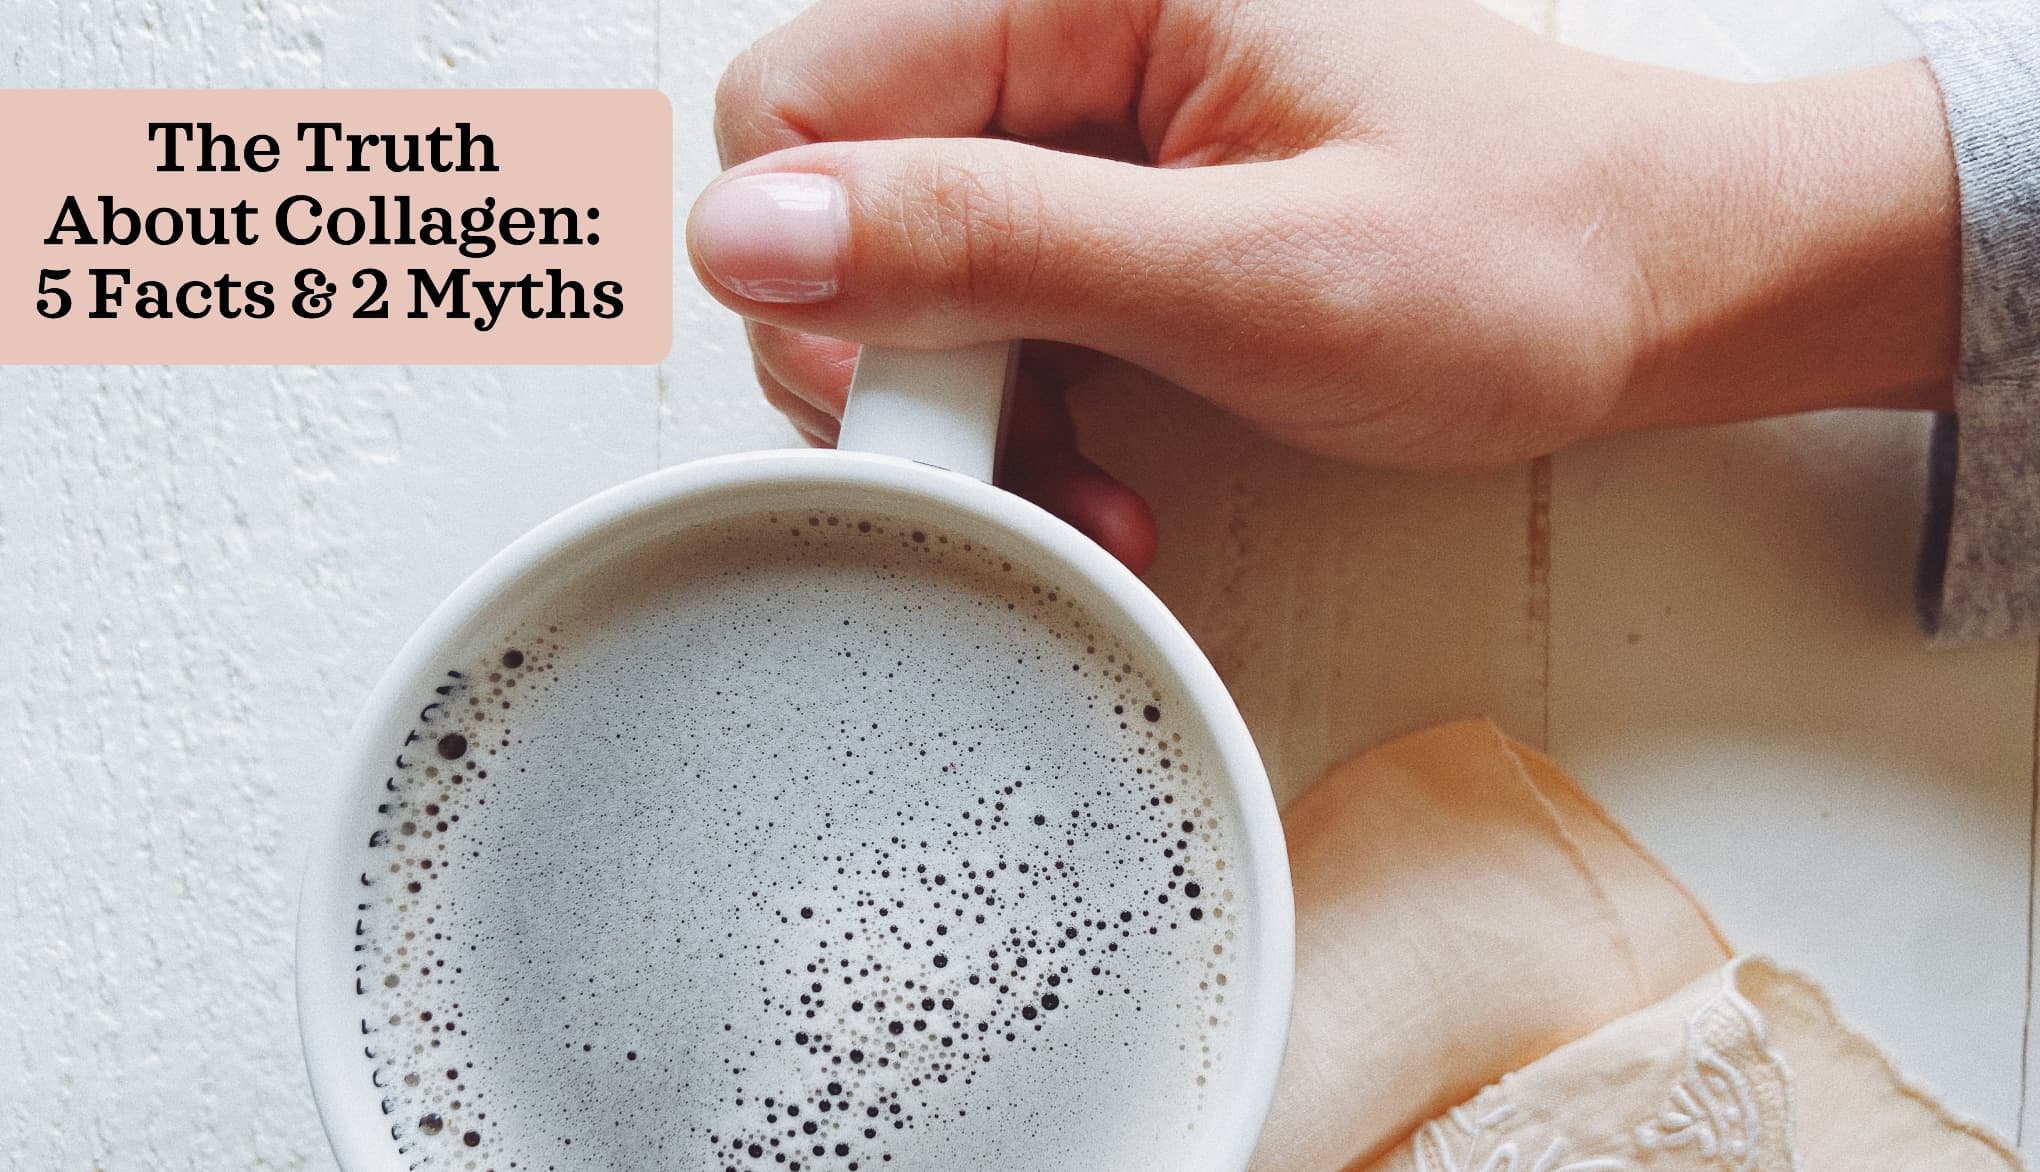 The Truth About Collagen: 5 Facts & 2 Myths